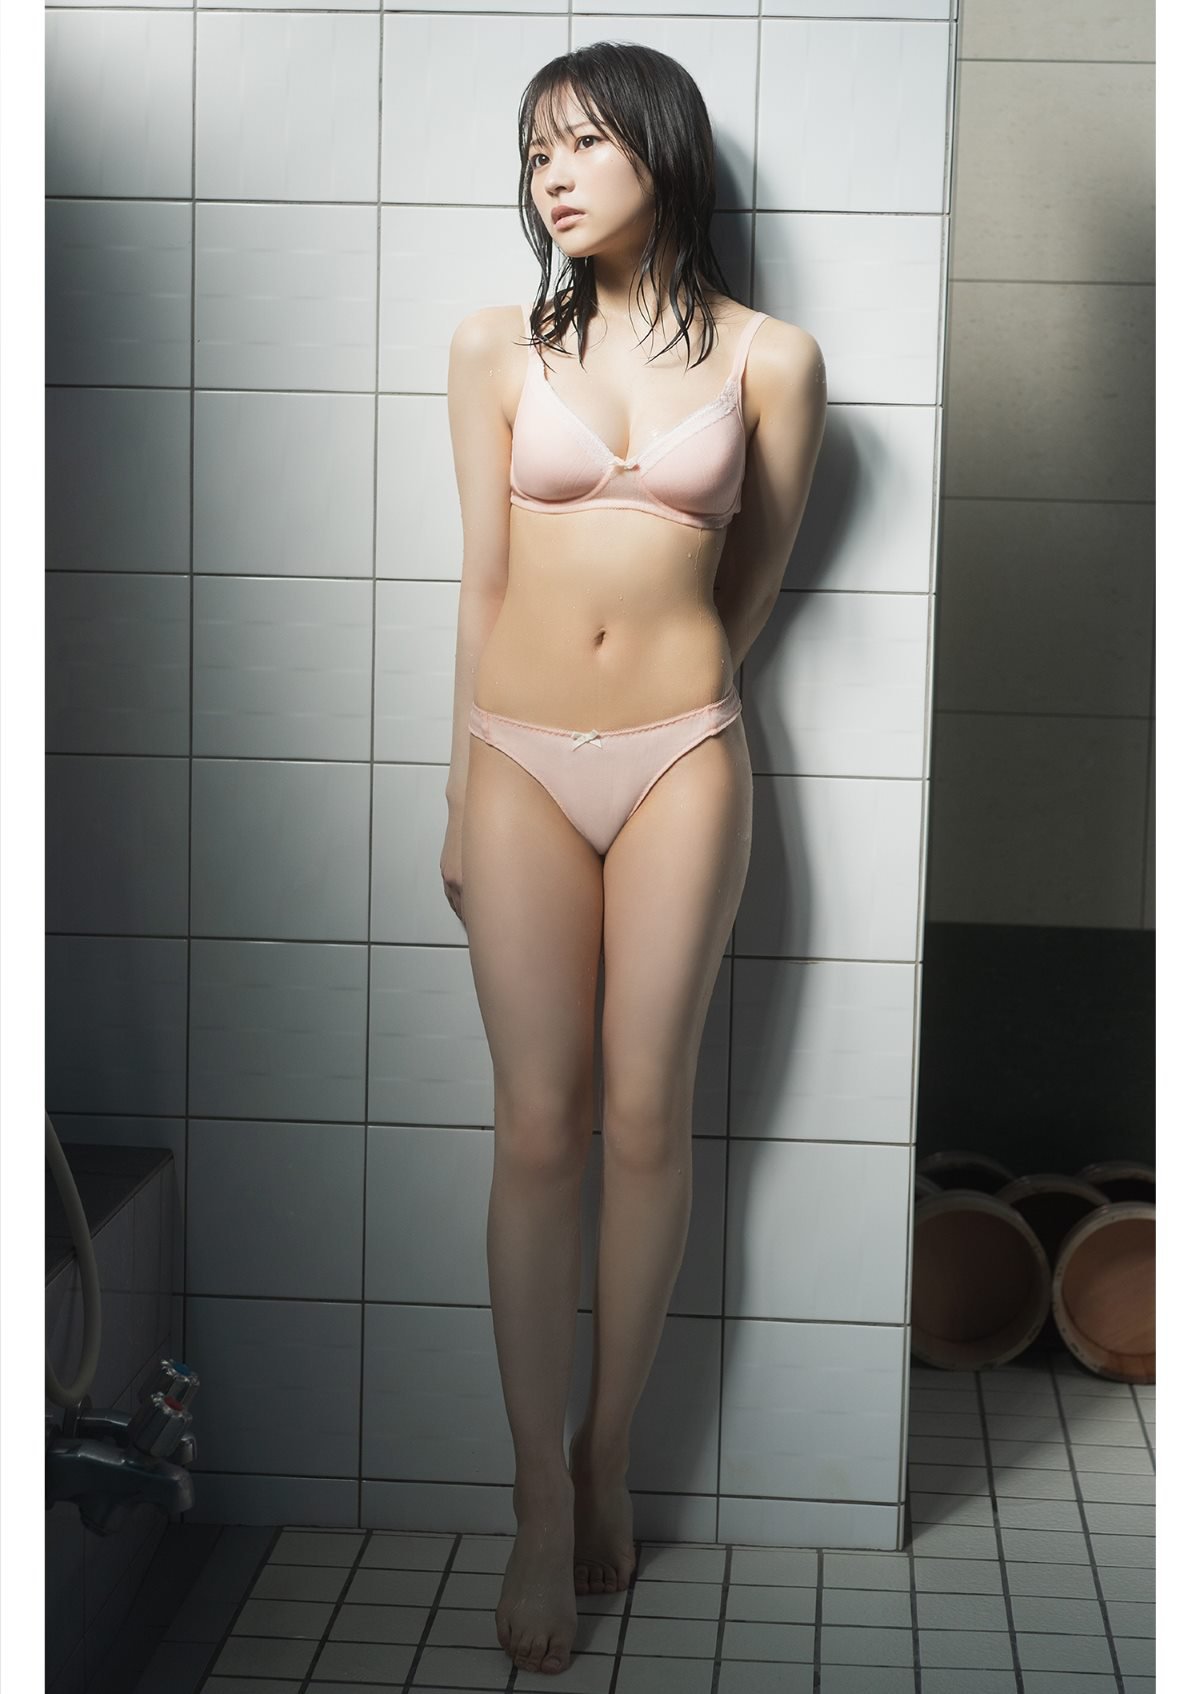 YJ Photobook Usa 宇咲 The only daughter of a public bath is training as a trimmer 銭湯のひとり娘は、トリマー修行中 2022 04 21 0007 4459921582.jpg